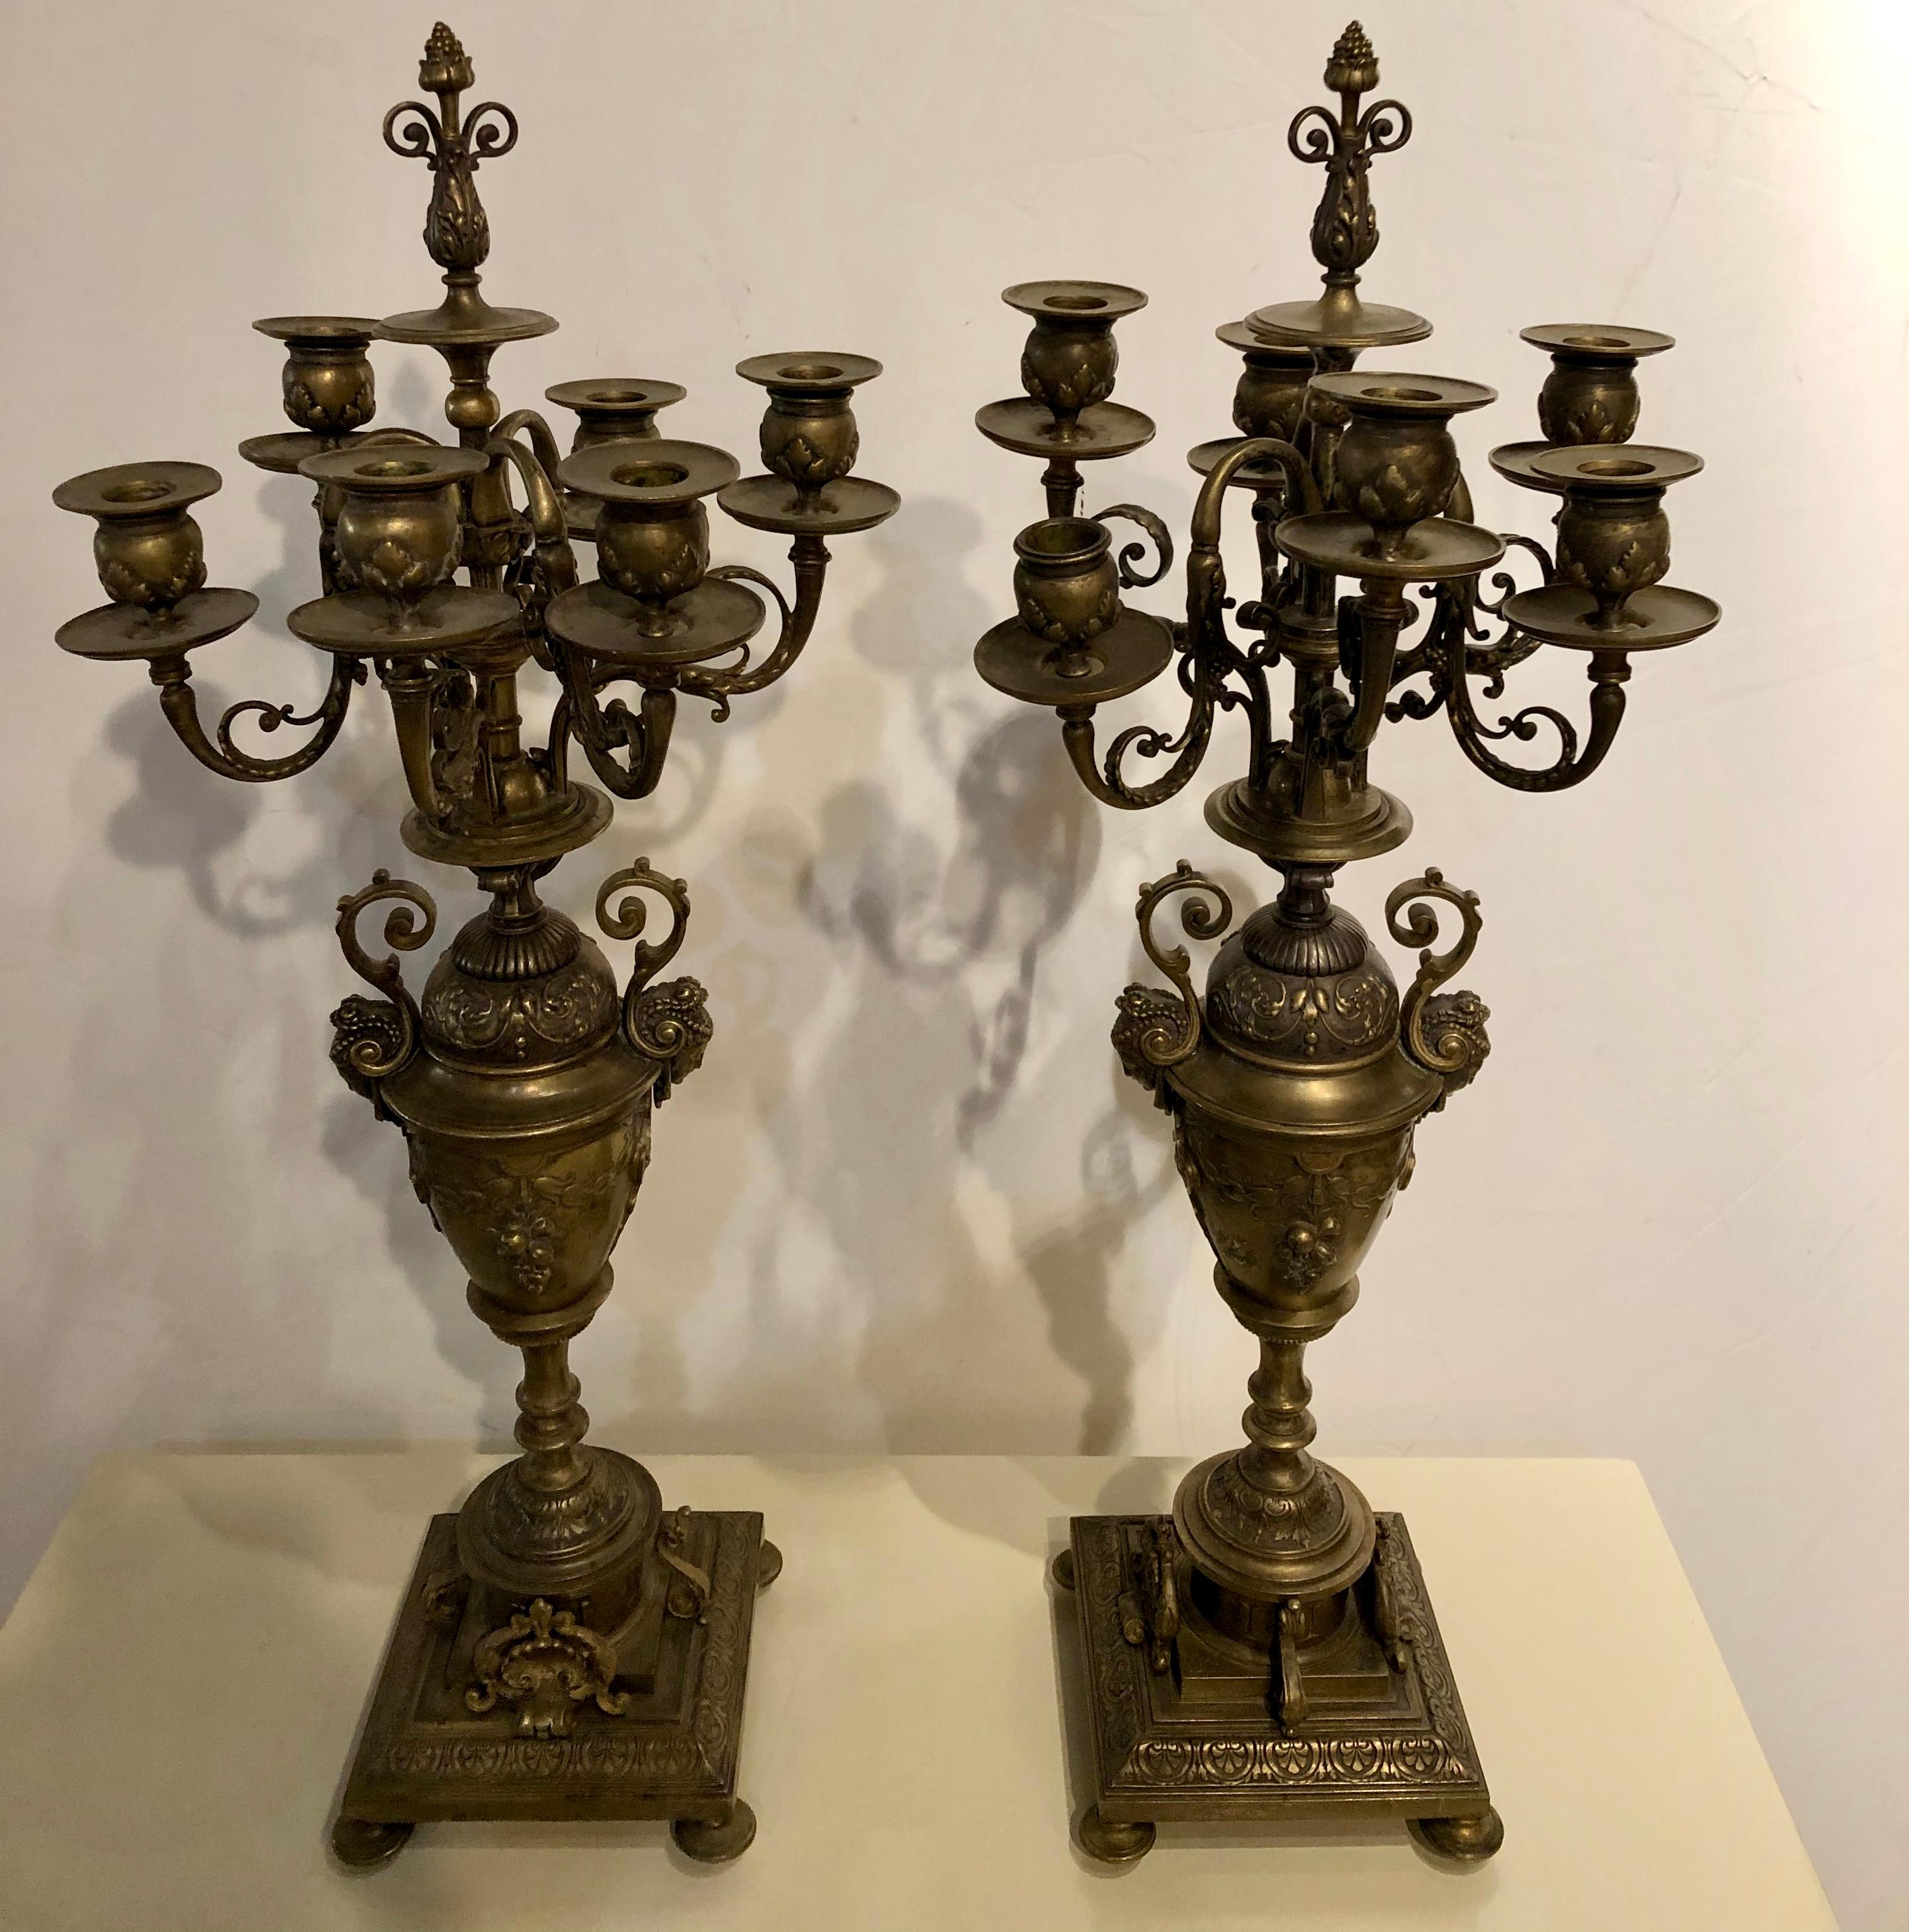 Neoclassical Pair of Brass Six-Arm Candelabras Bearing Figurative Faces and Fruits